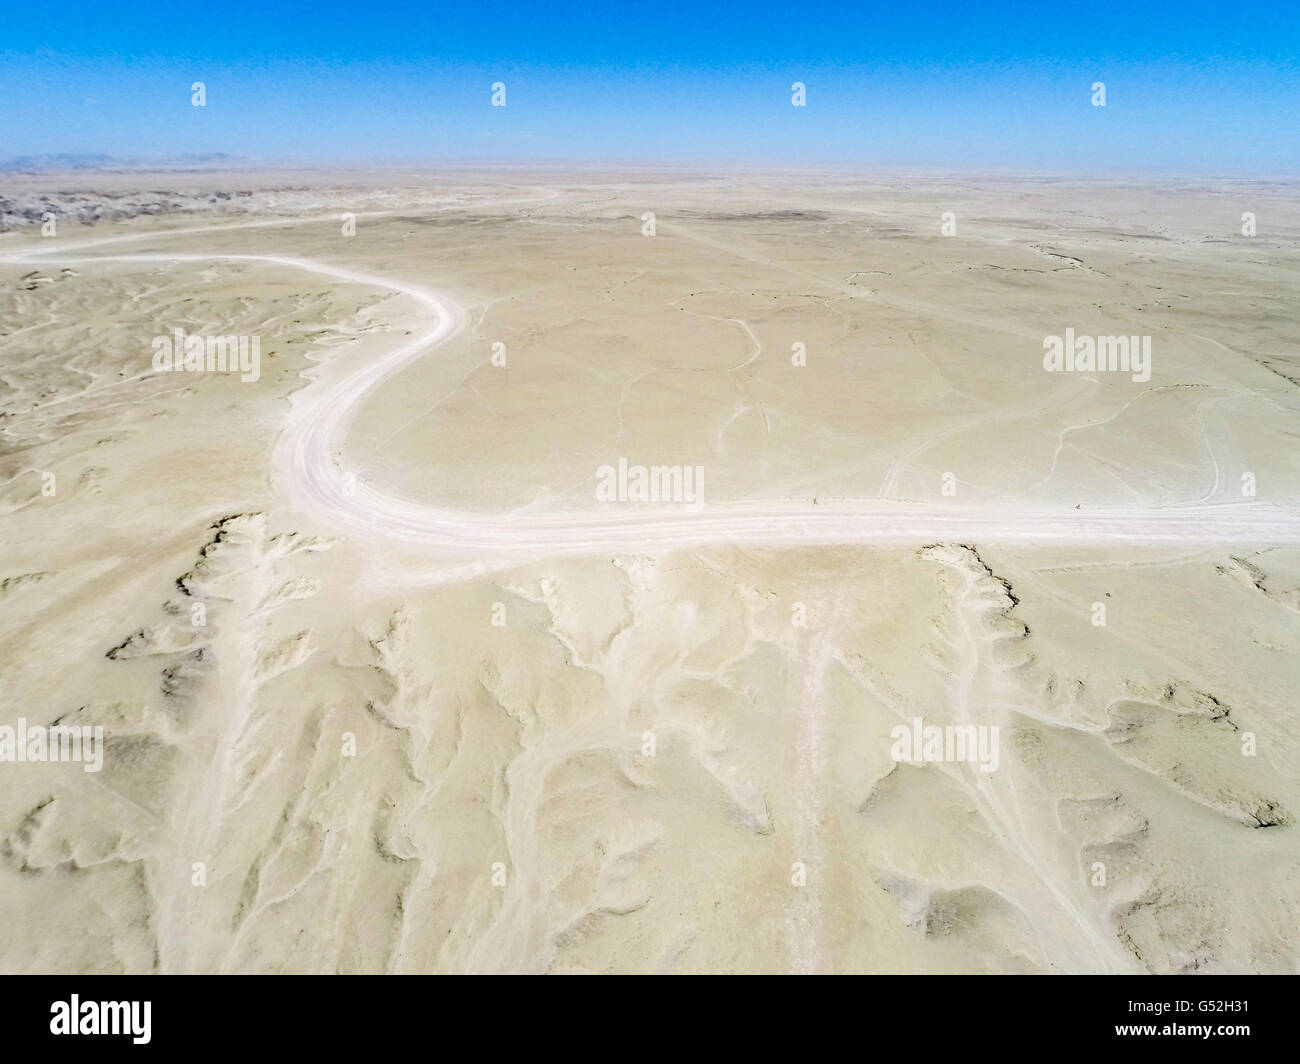 Namibia, Erongo, Swakopmund, moon landscape from the air near Swakopmund, aerial photo with the Qudrocopter Stock Photo